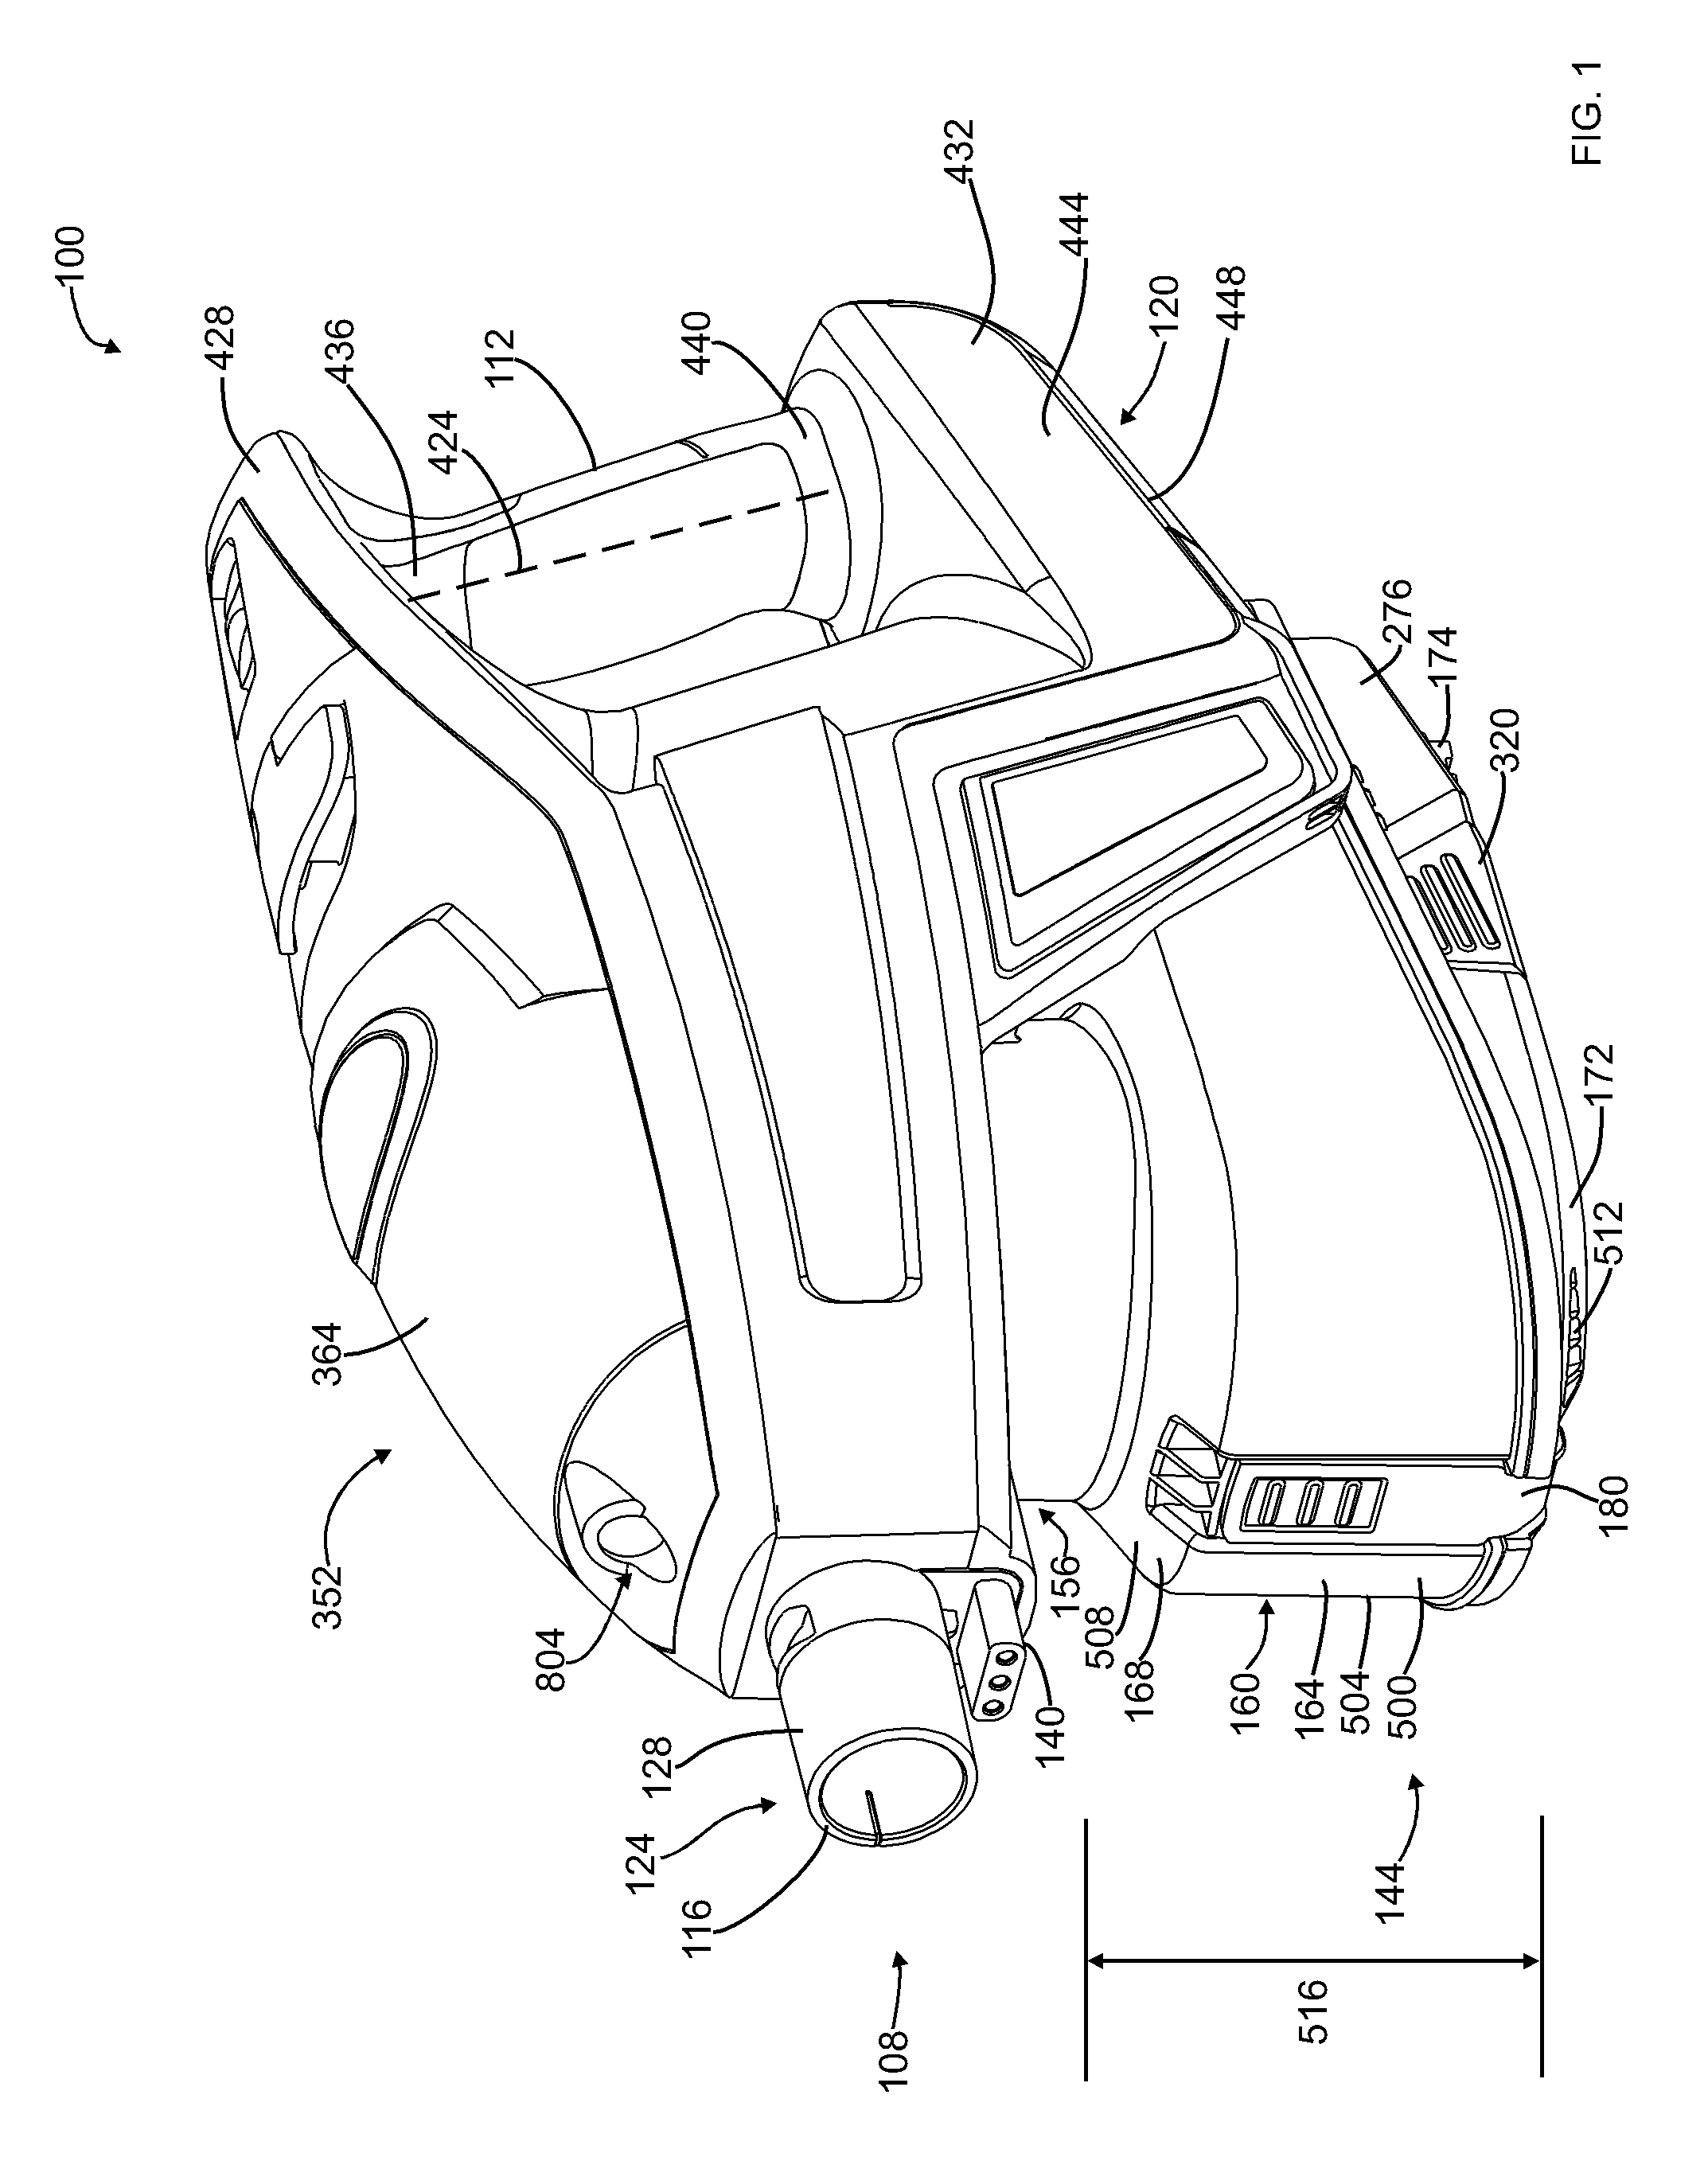 Portable surface cleaning apparatus